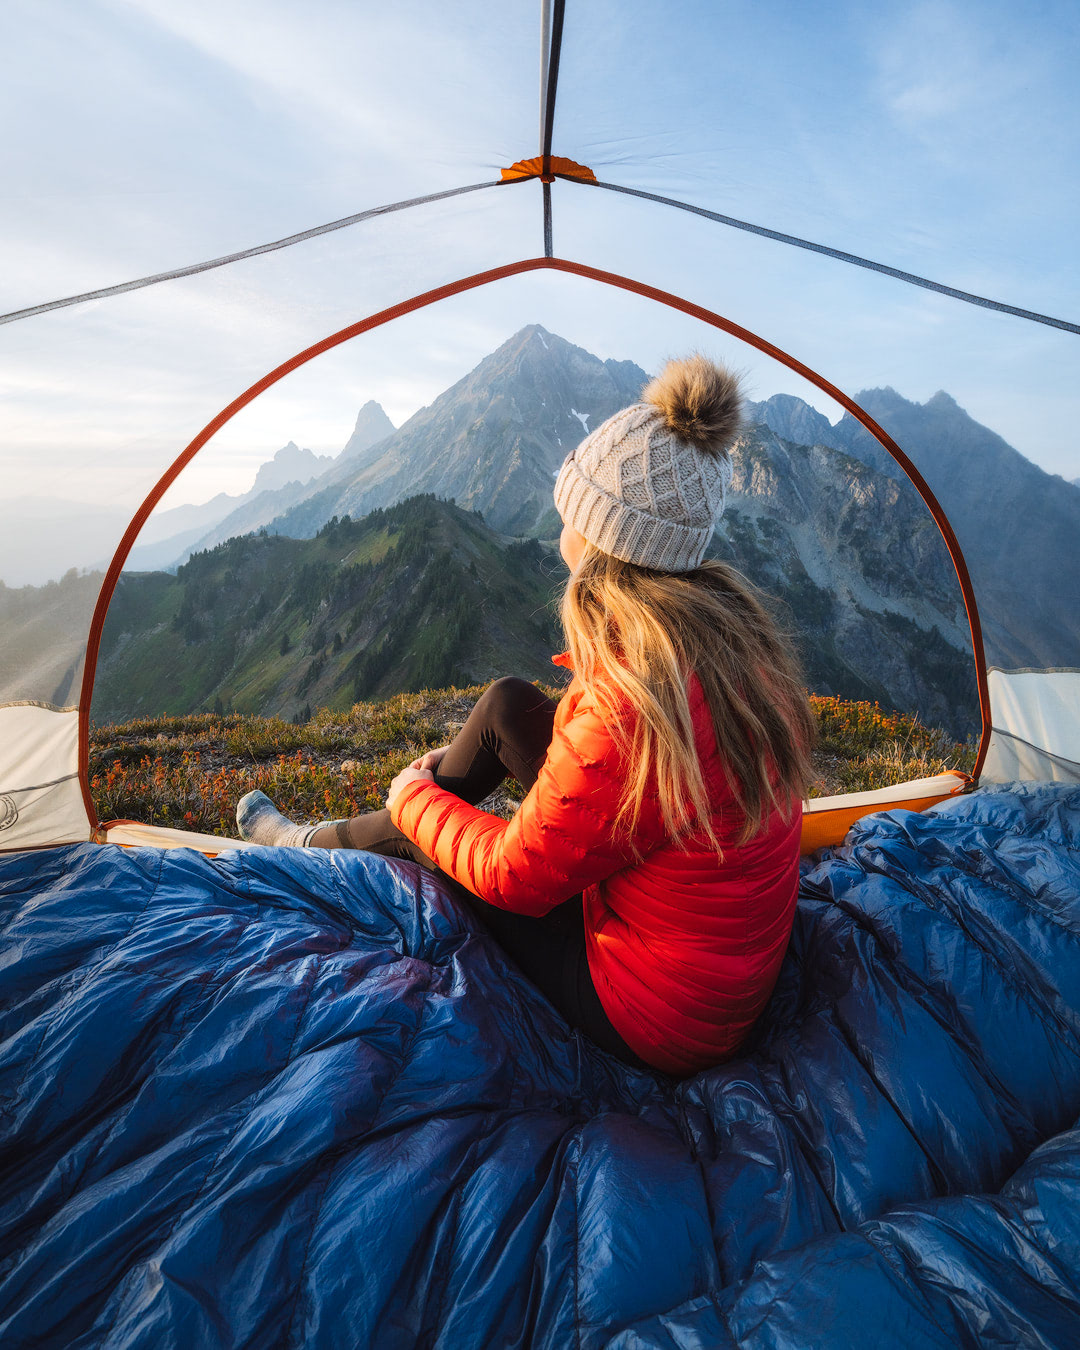 How To Get Over Your Fears of First Time Backcountry Camping - Tent With a View